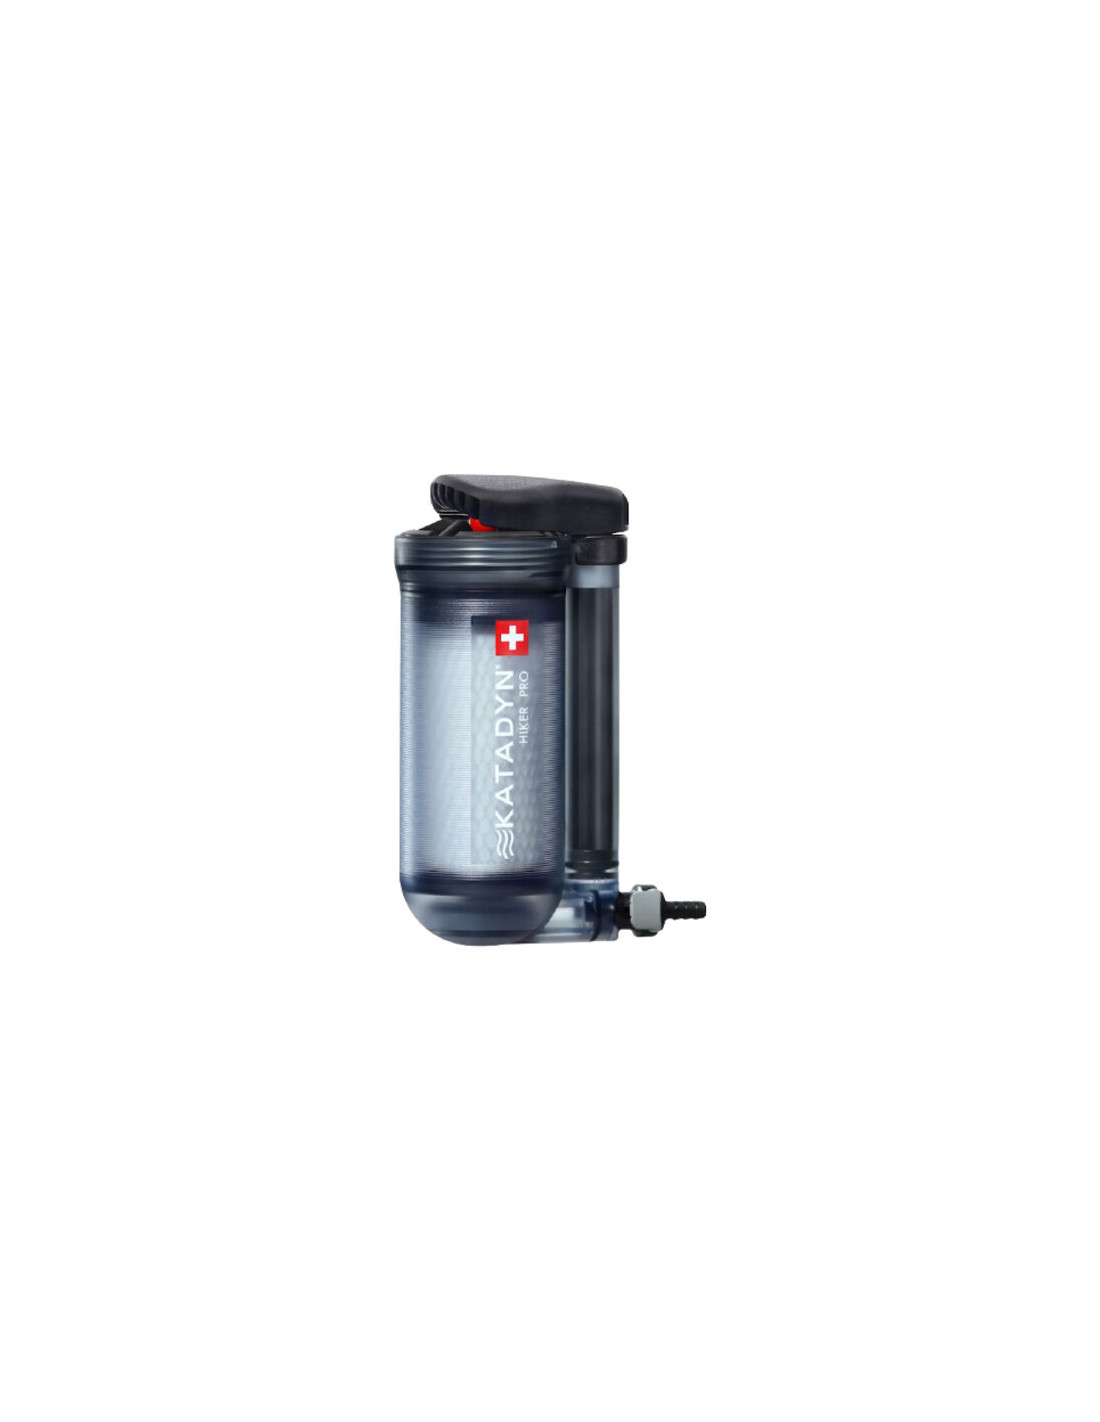 HIKER PRO WATER MICROFILTER